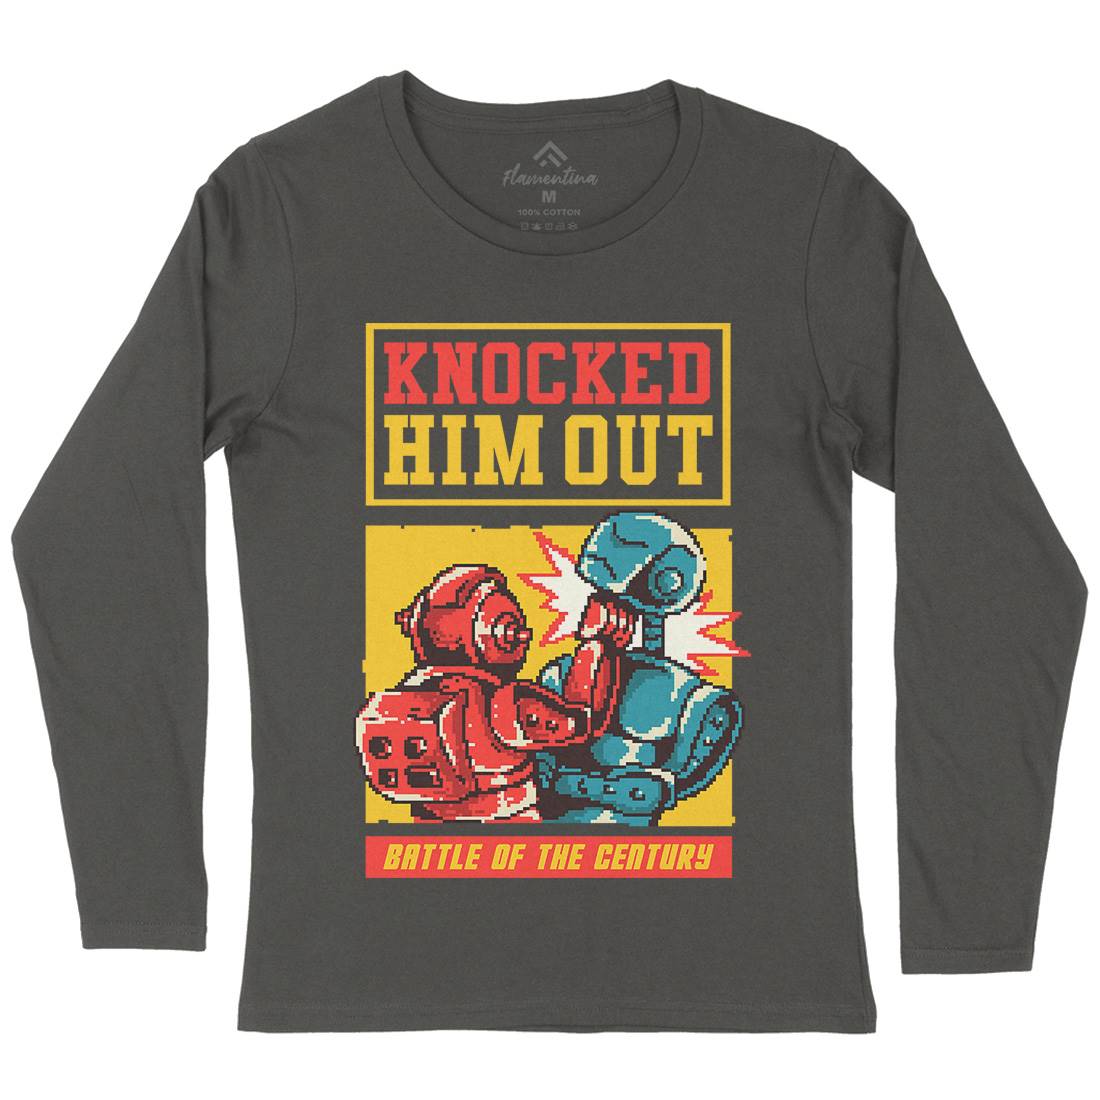 Knocked Him Out Womens Long Sleeve T-Shirt Space B923